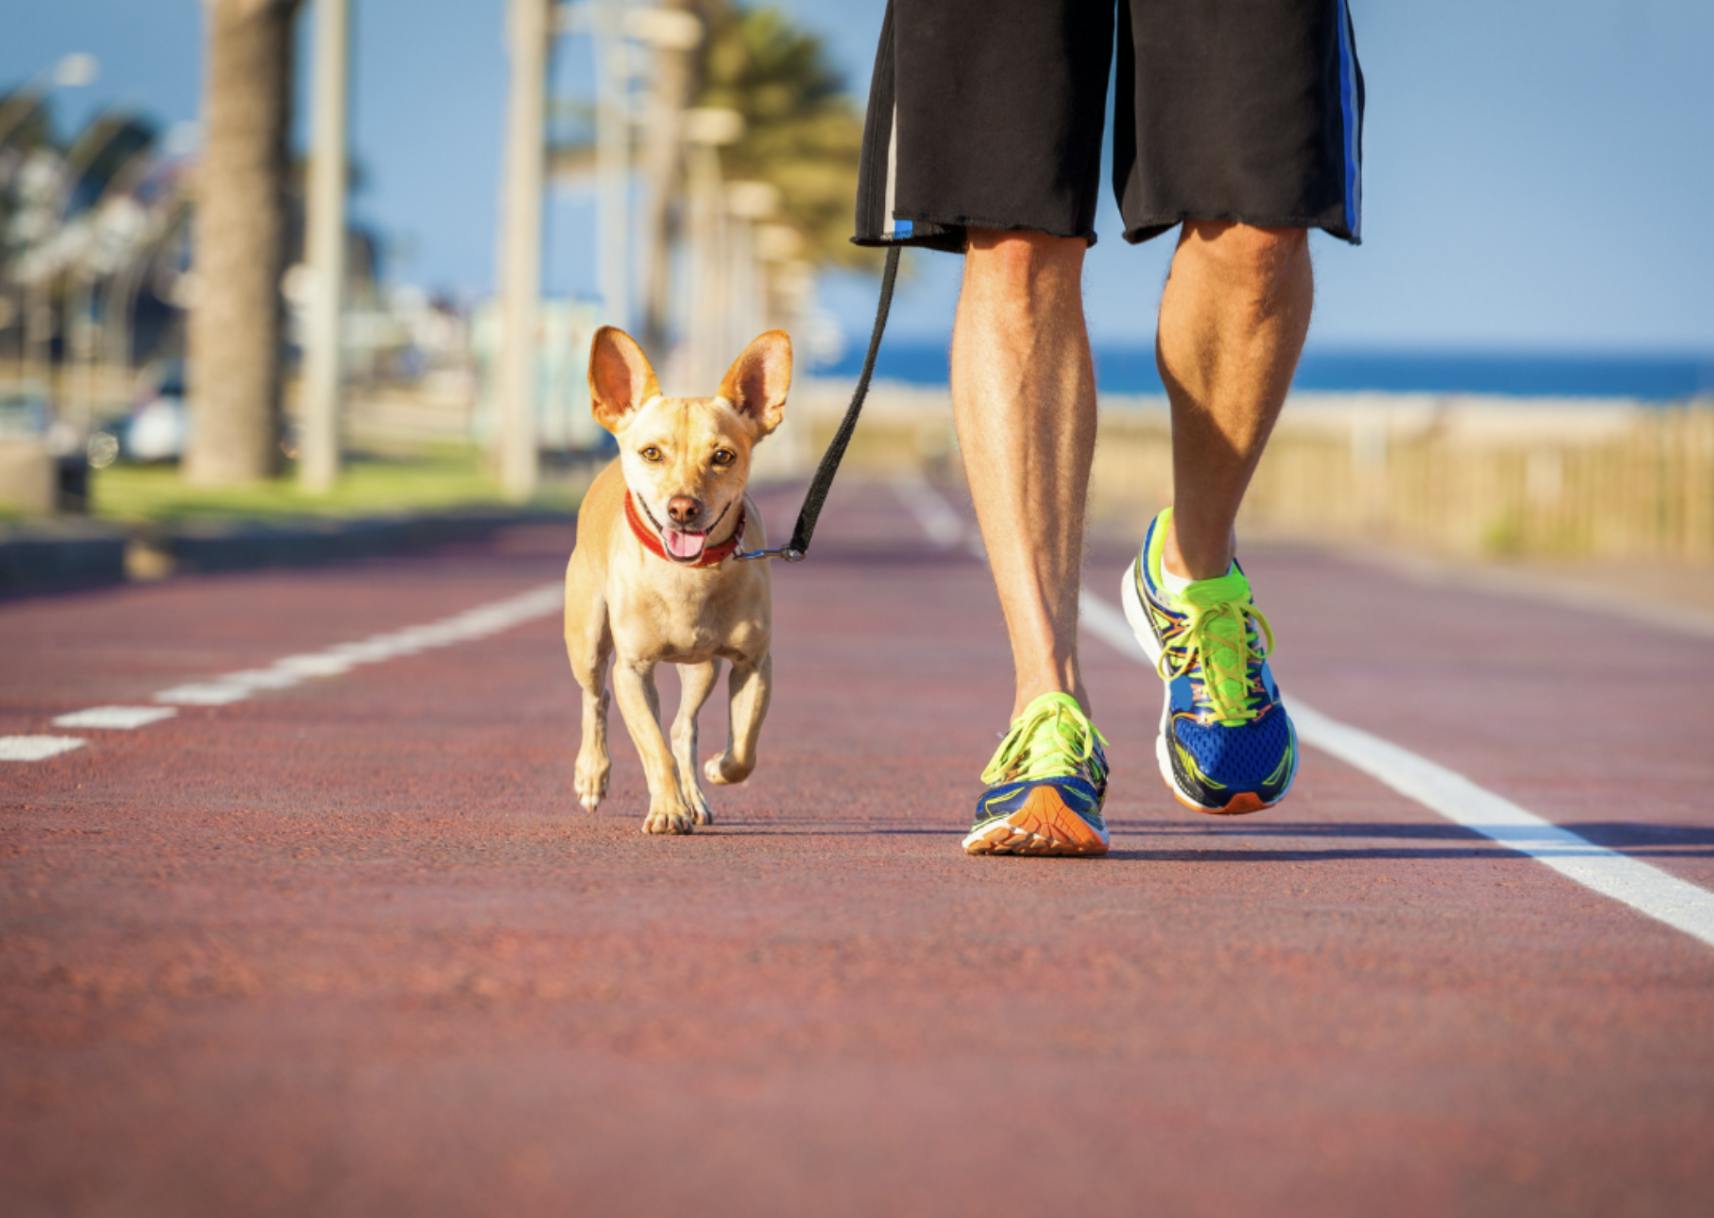 daily-wag-8-ways-to-get-the-most-out-of-a-walk-with-your-dog-hero-image